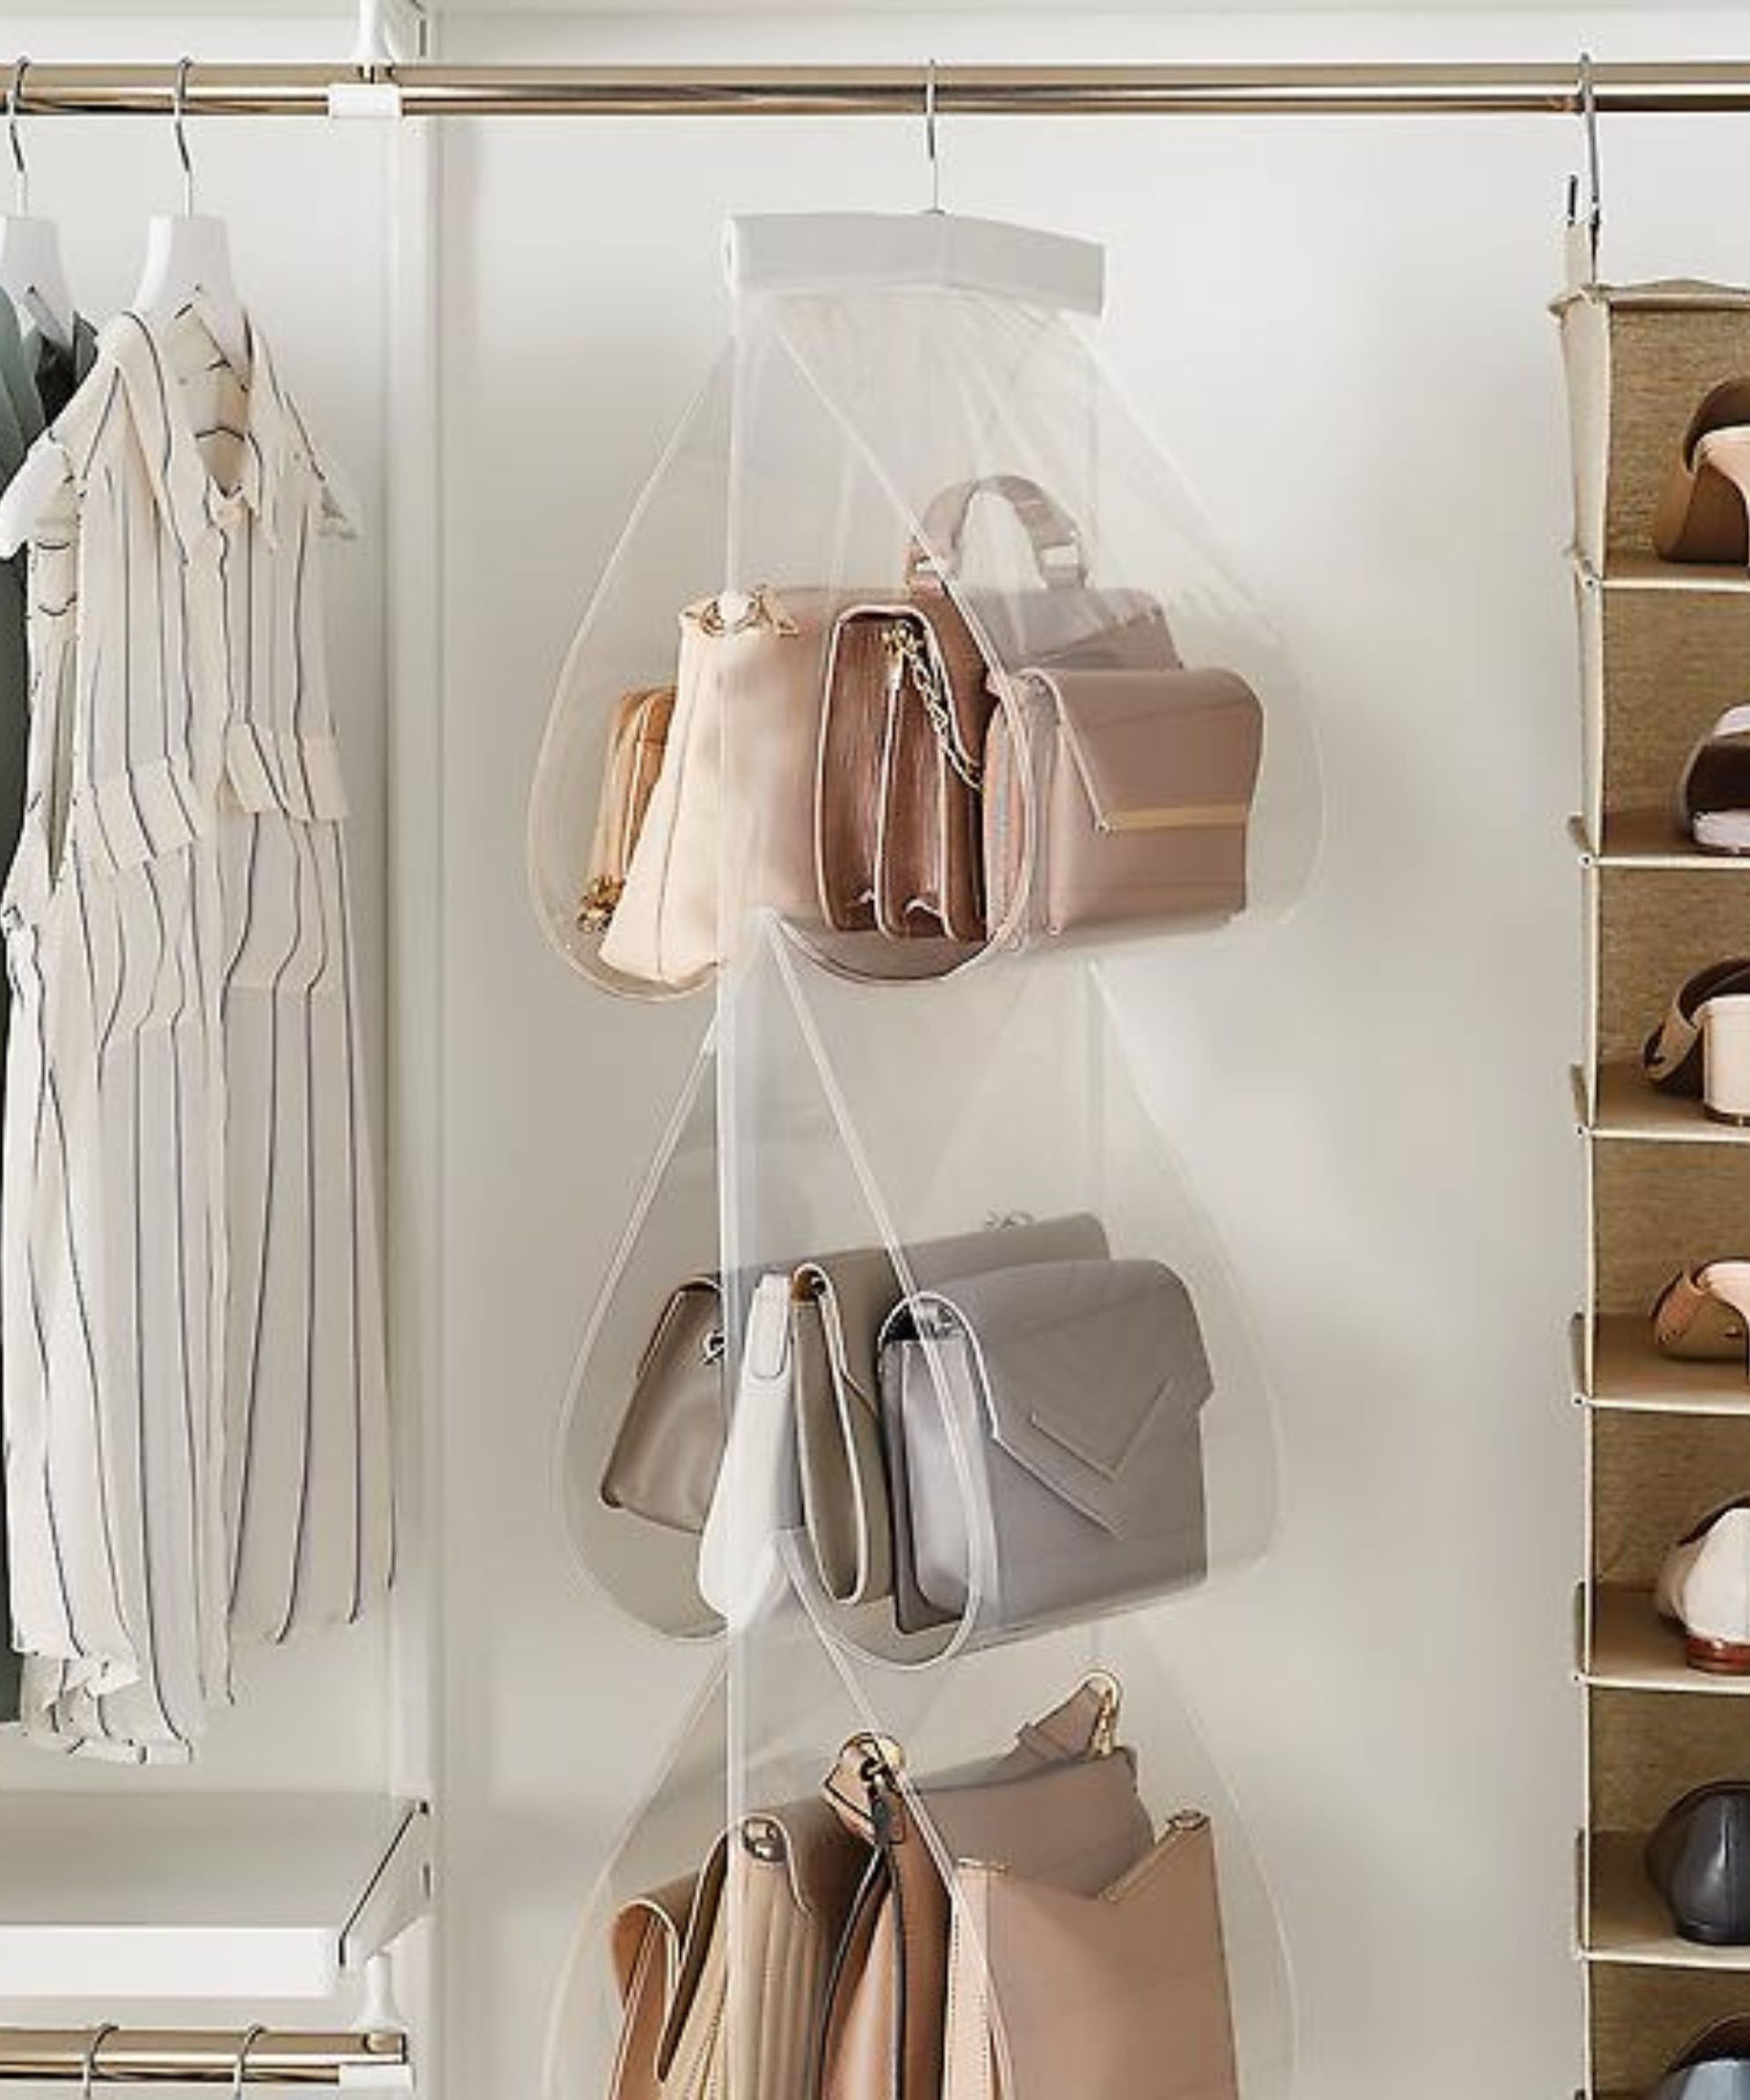 <p>                     ‘If you have a smaller closet and have limited space, consider using a pocket purse organizer that can be hung from a rod in your closet,’ continues Lauren Saltman of Living. Simplified.                   </p>